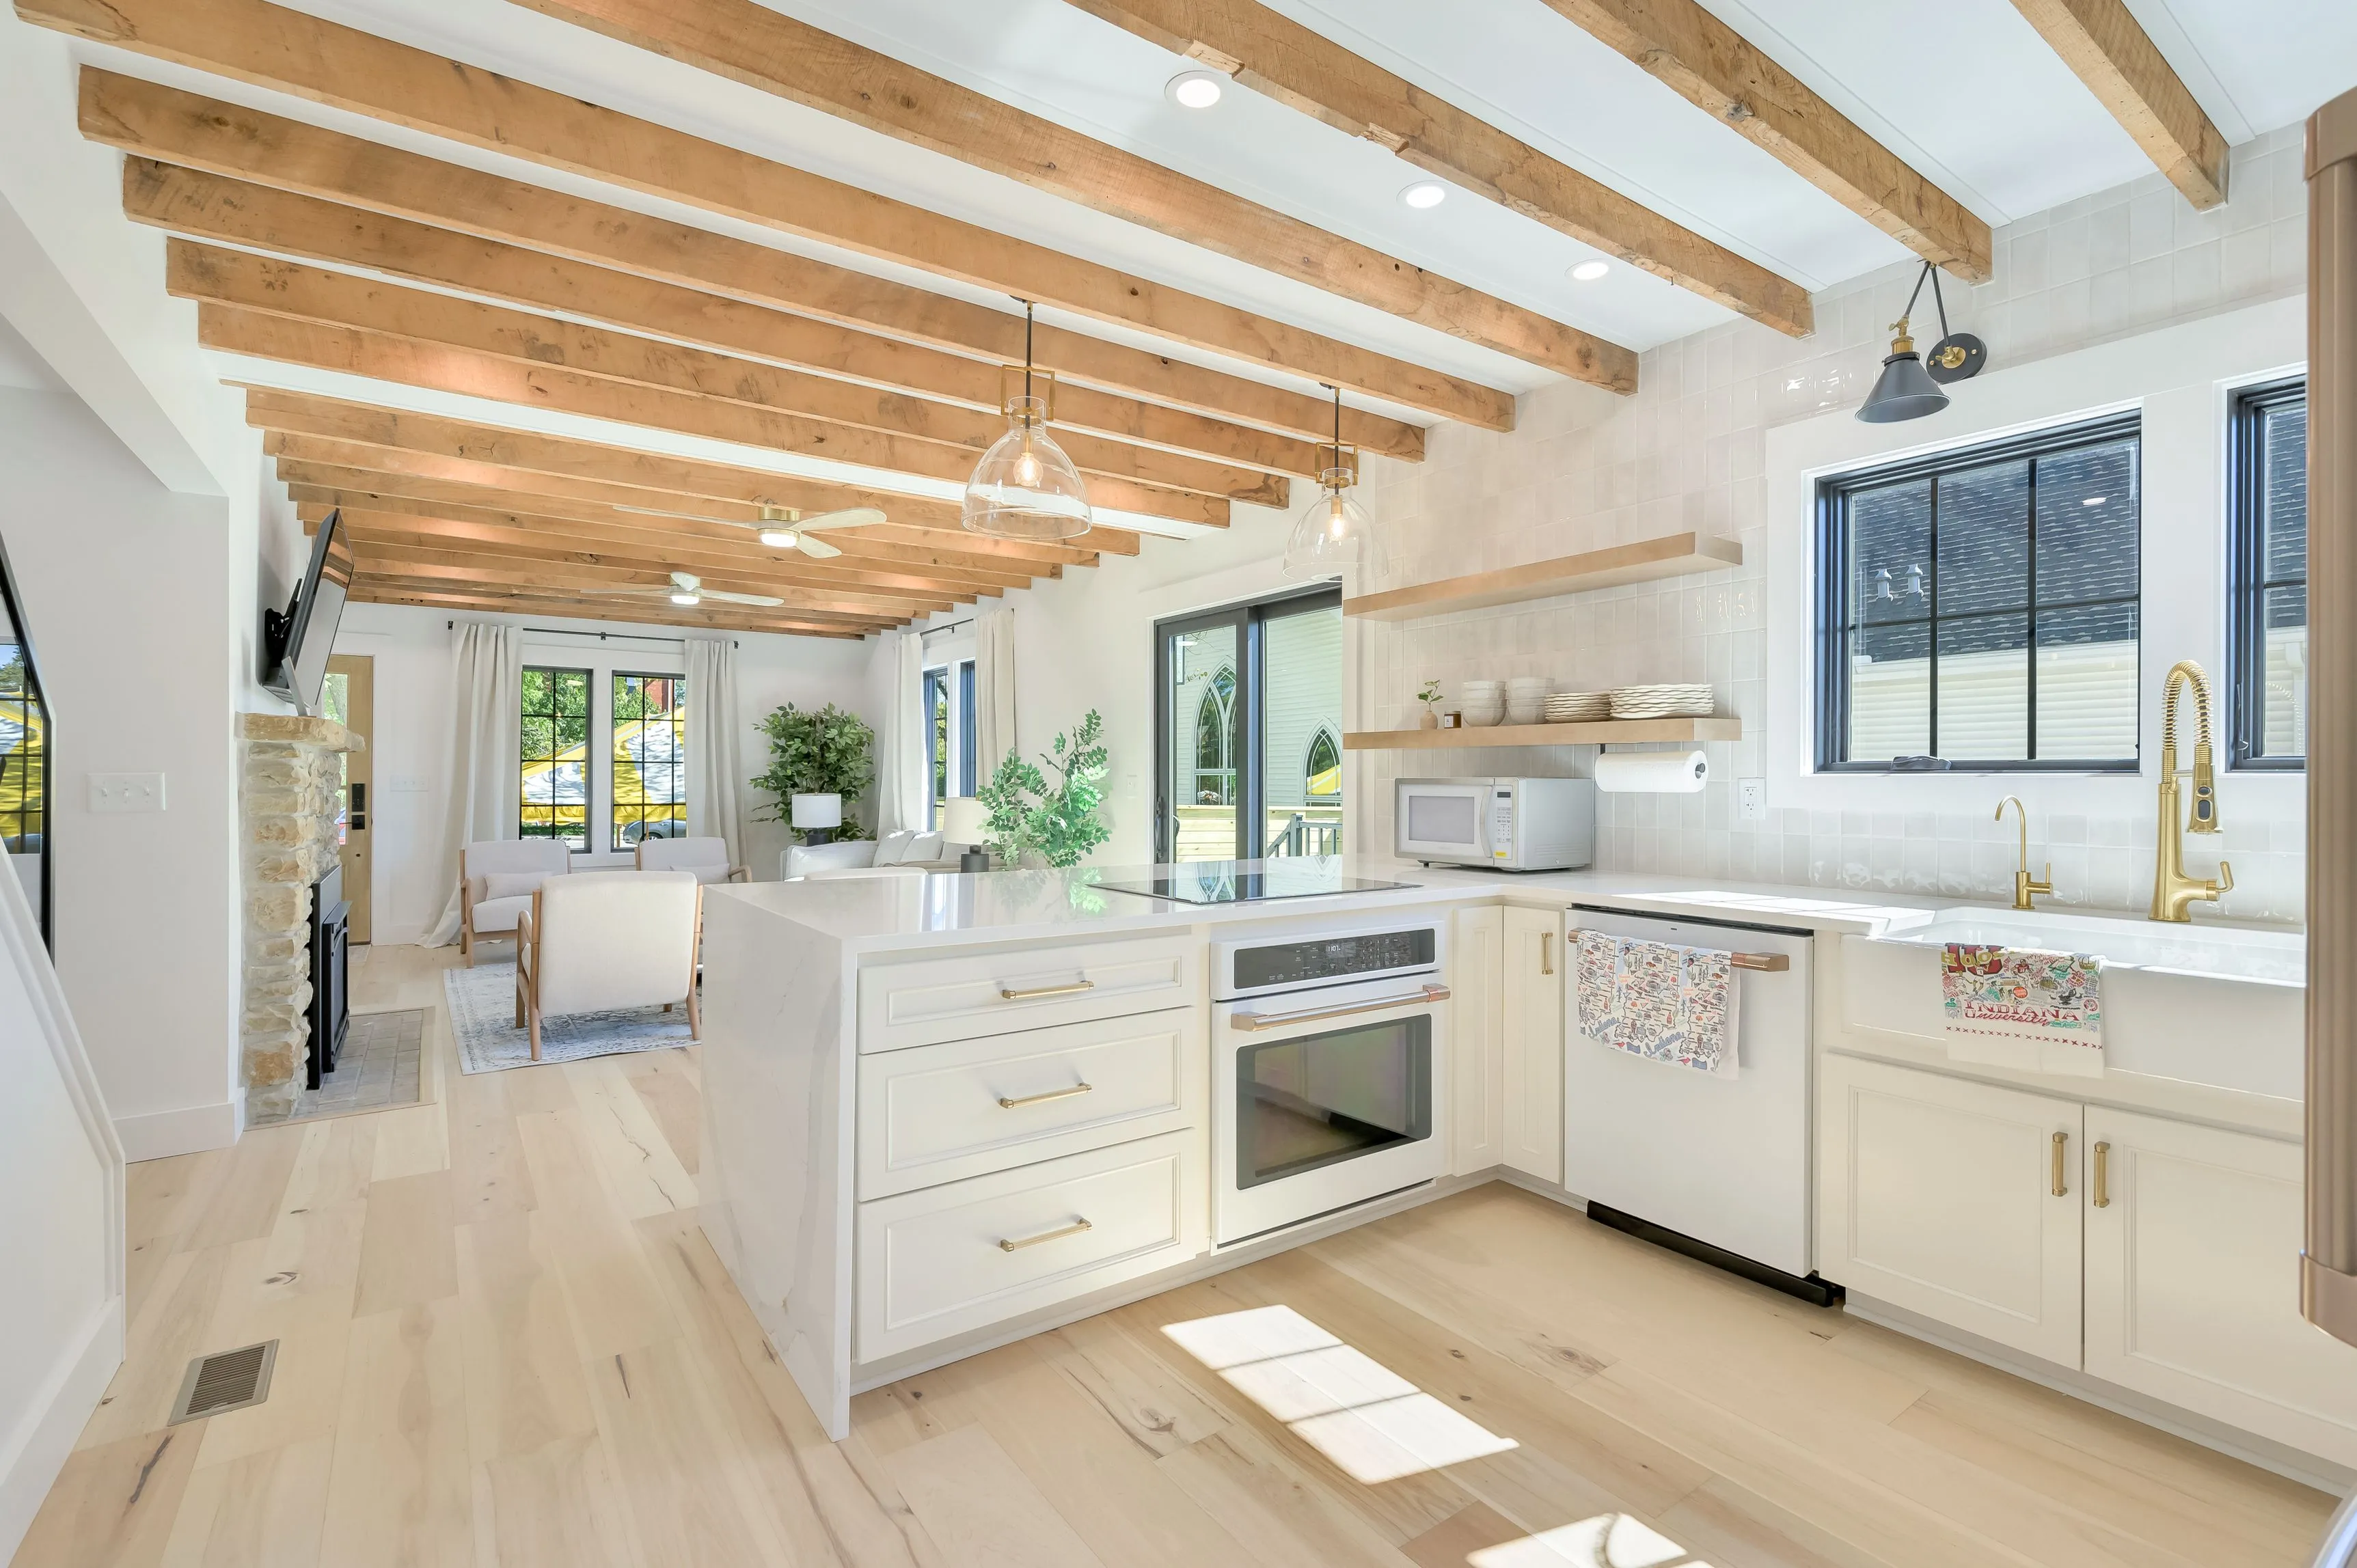 Bright and airy modern kitchen with white cabinetry, marble countertops, and exposed wooden beams leading into an open-plan living area with large windows.